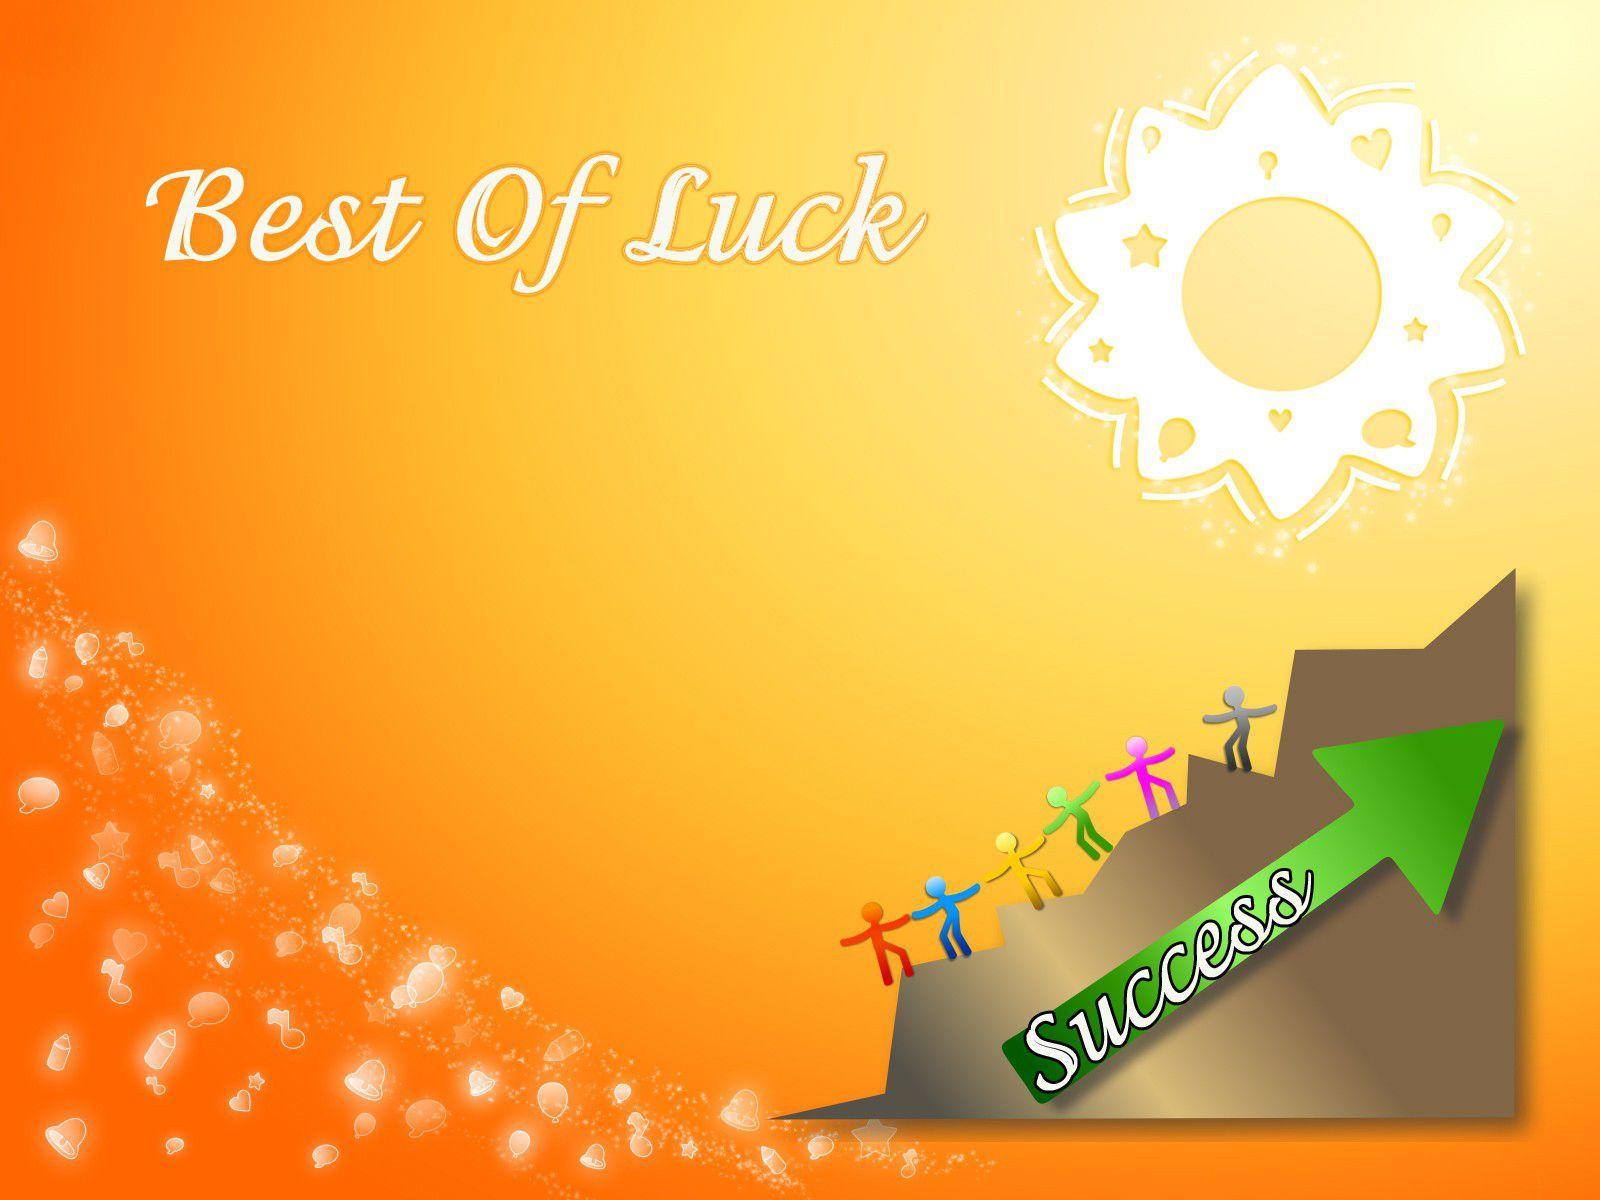 100+] Good Luck Pictures | Wallpapers.com